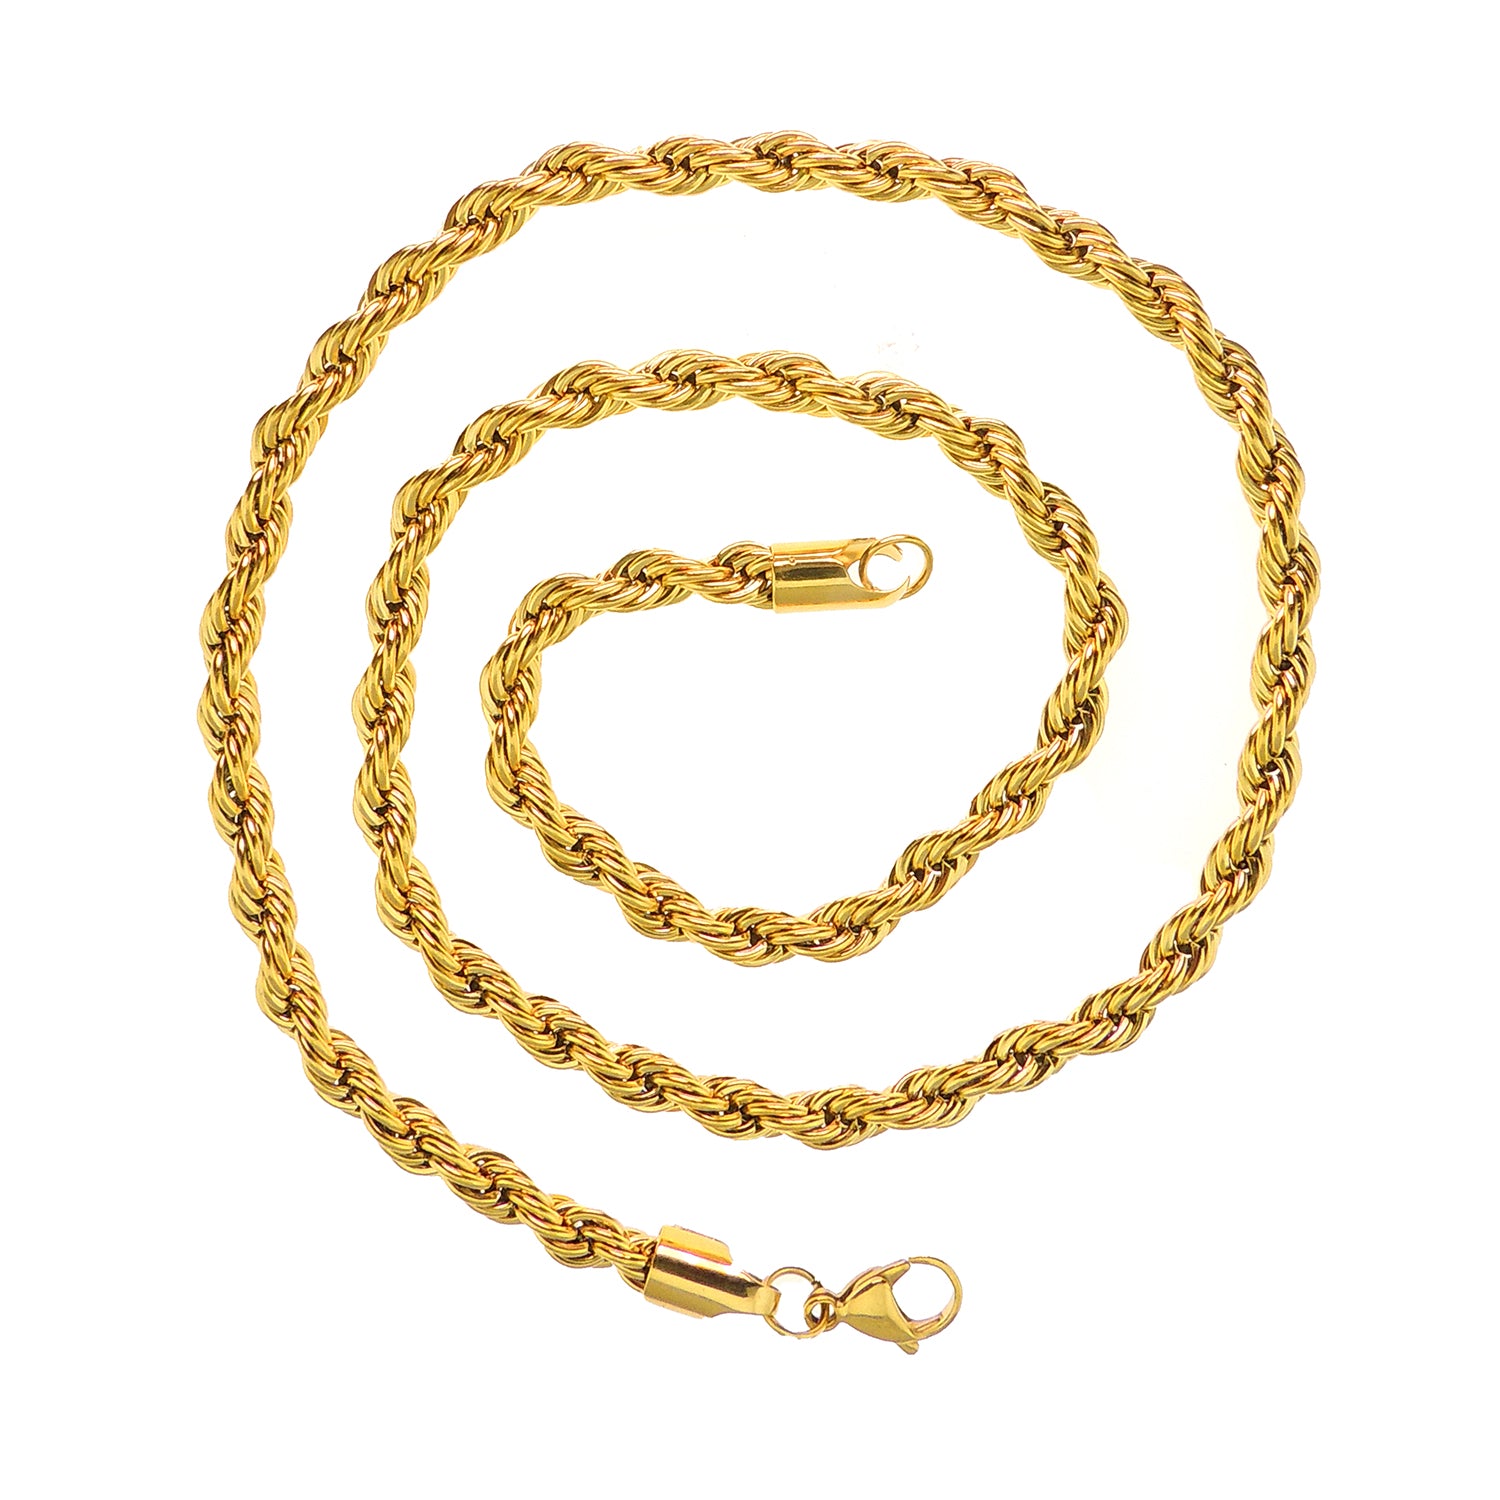 Gold Twisted Rope Chain Necklace Hip Hop Men Women Ginger Lyne Collection - 8 Inch Gold